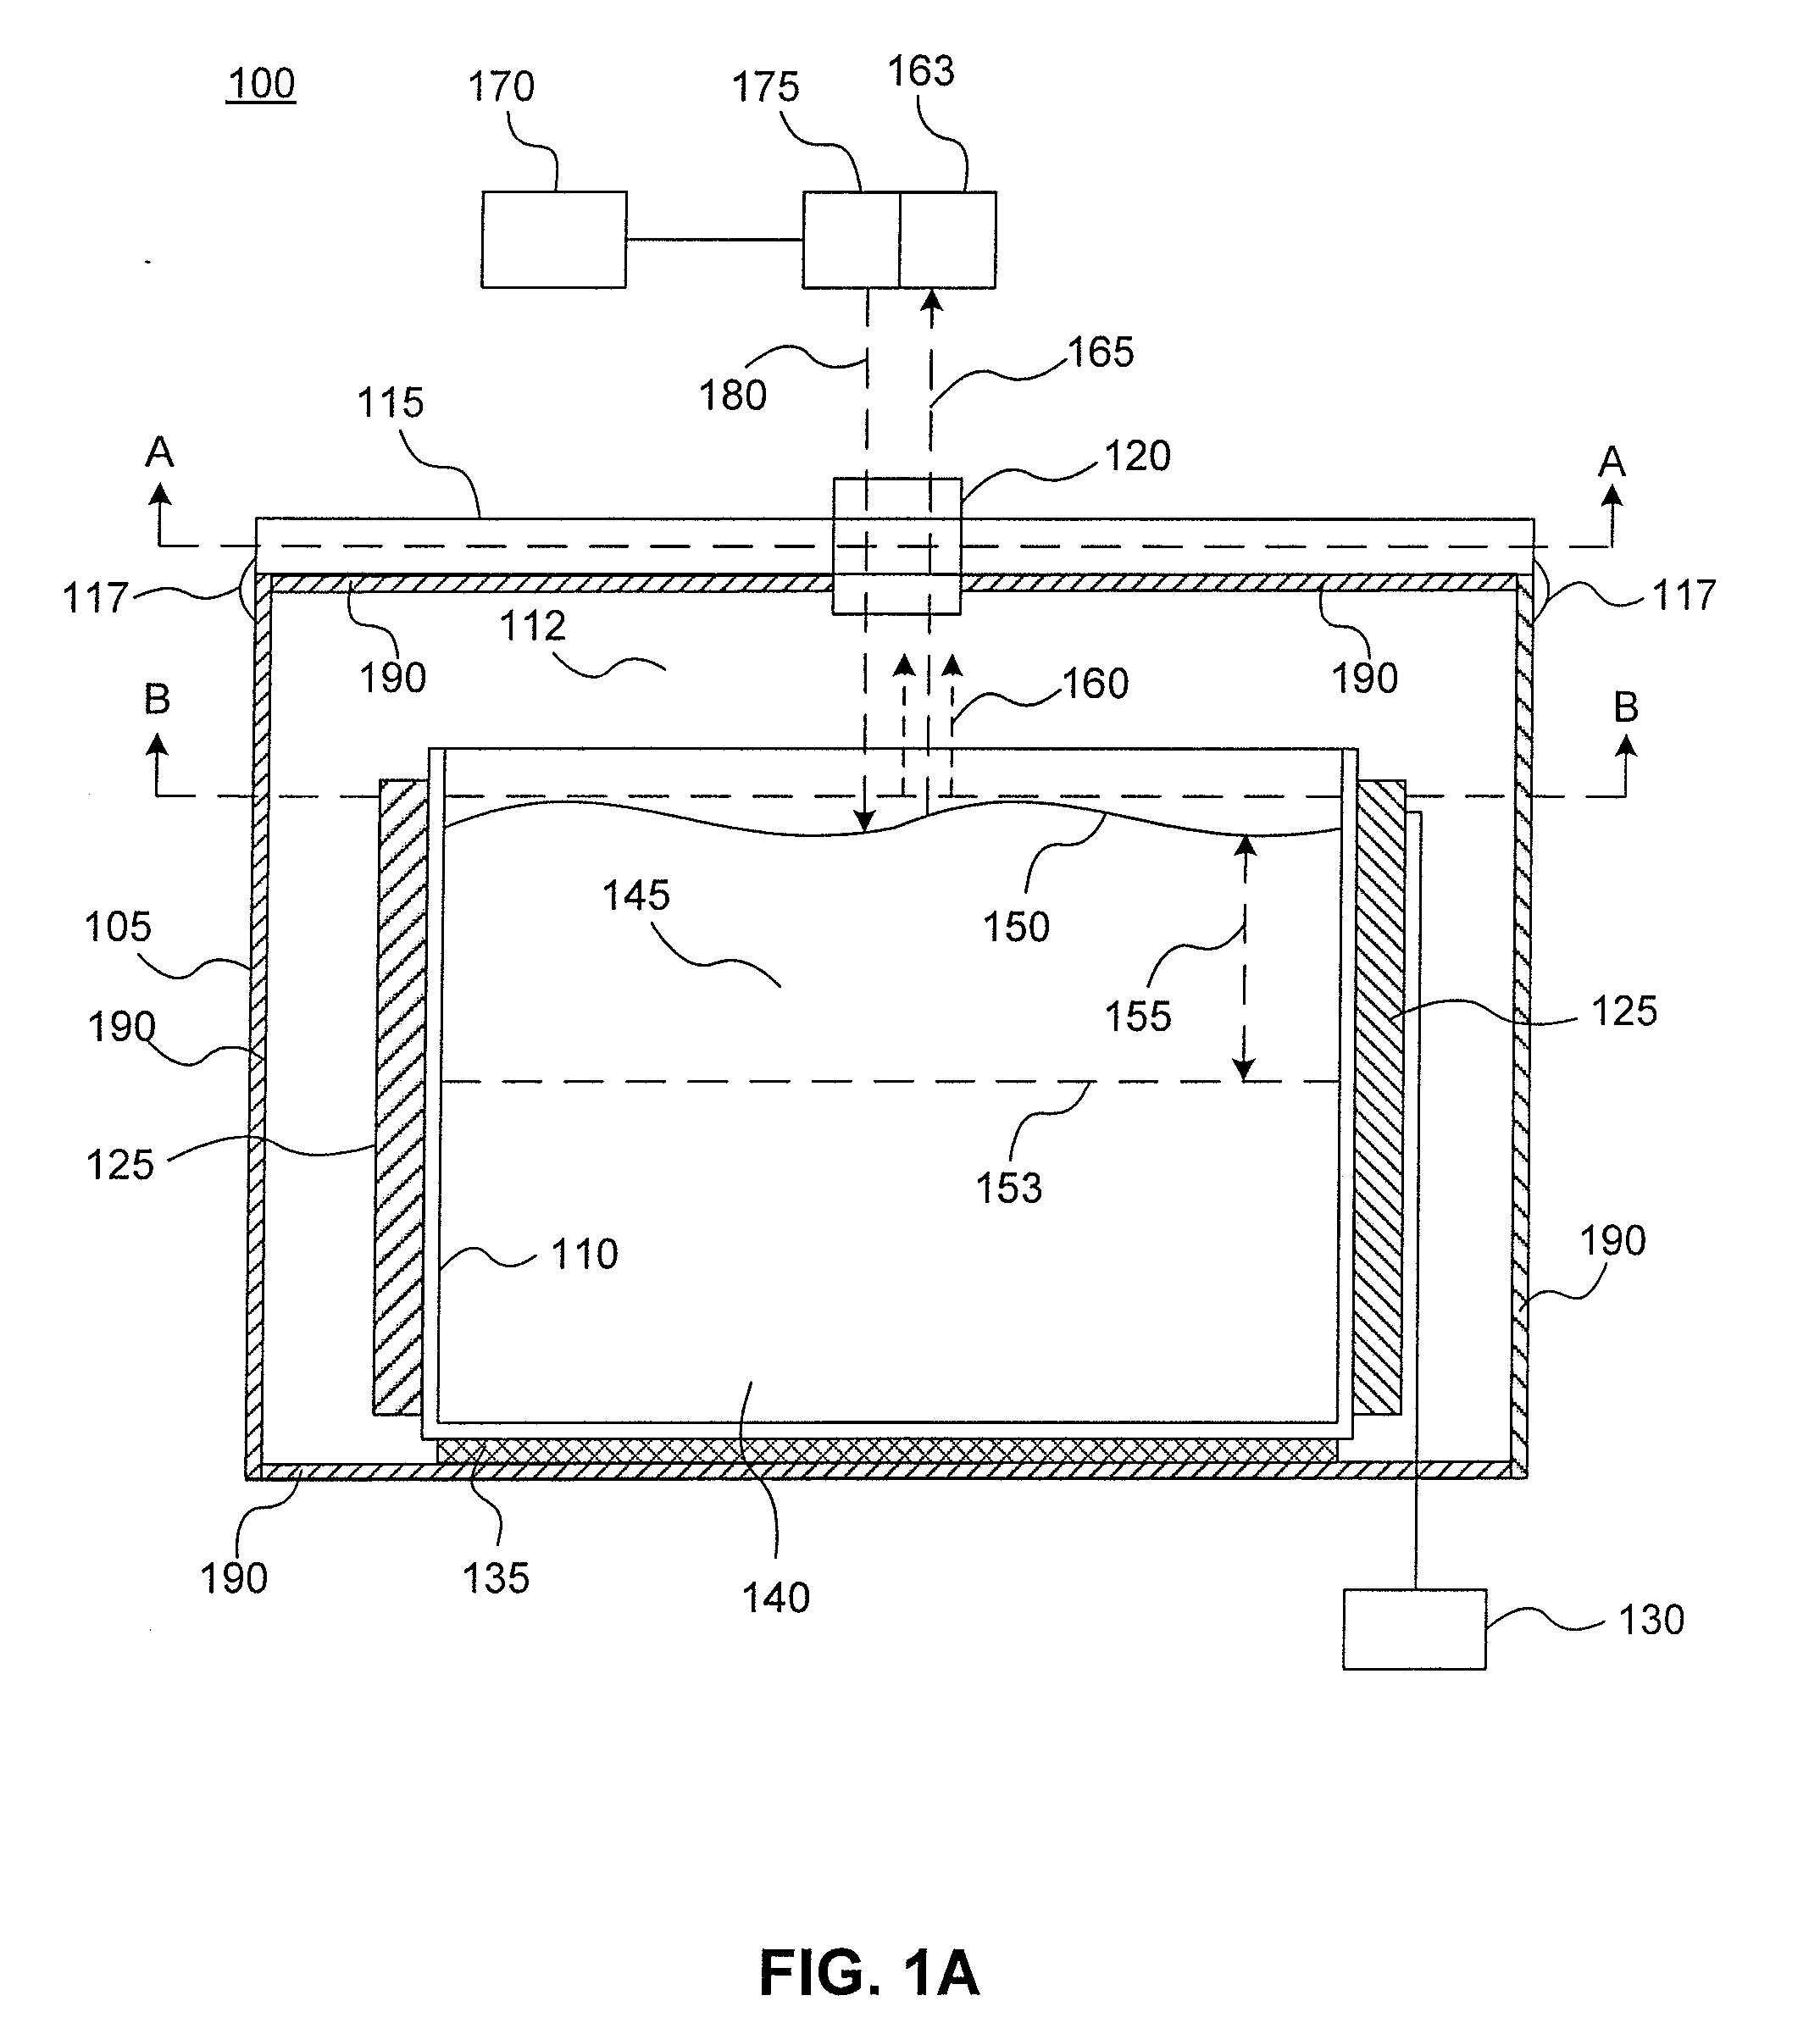 Methods and Systems for Monitoring a Solid-Liquid Interface